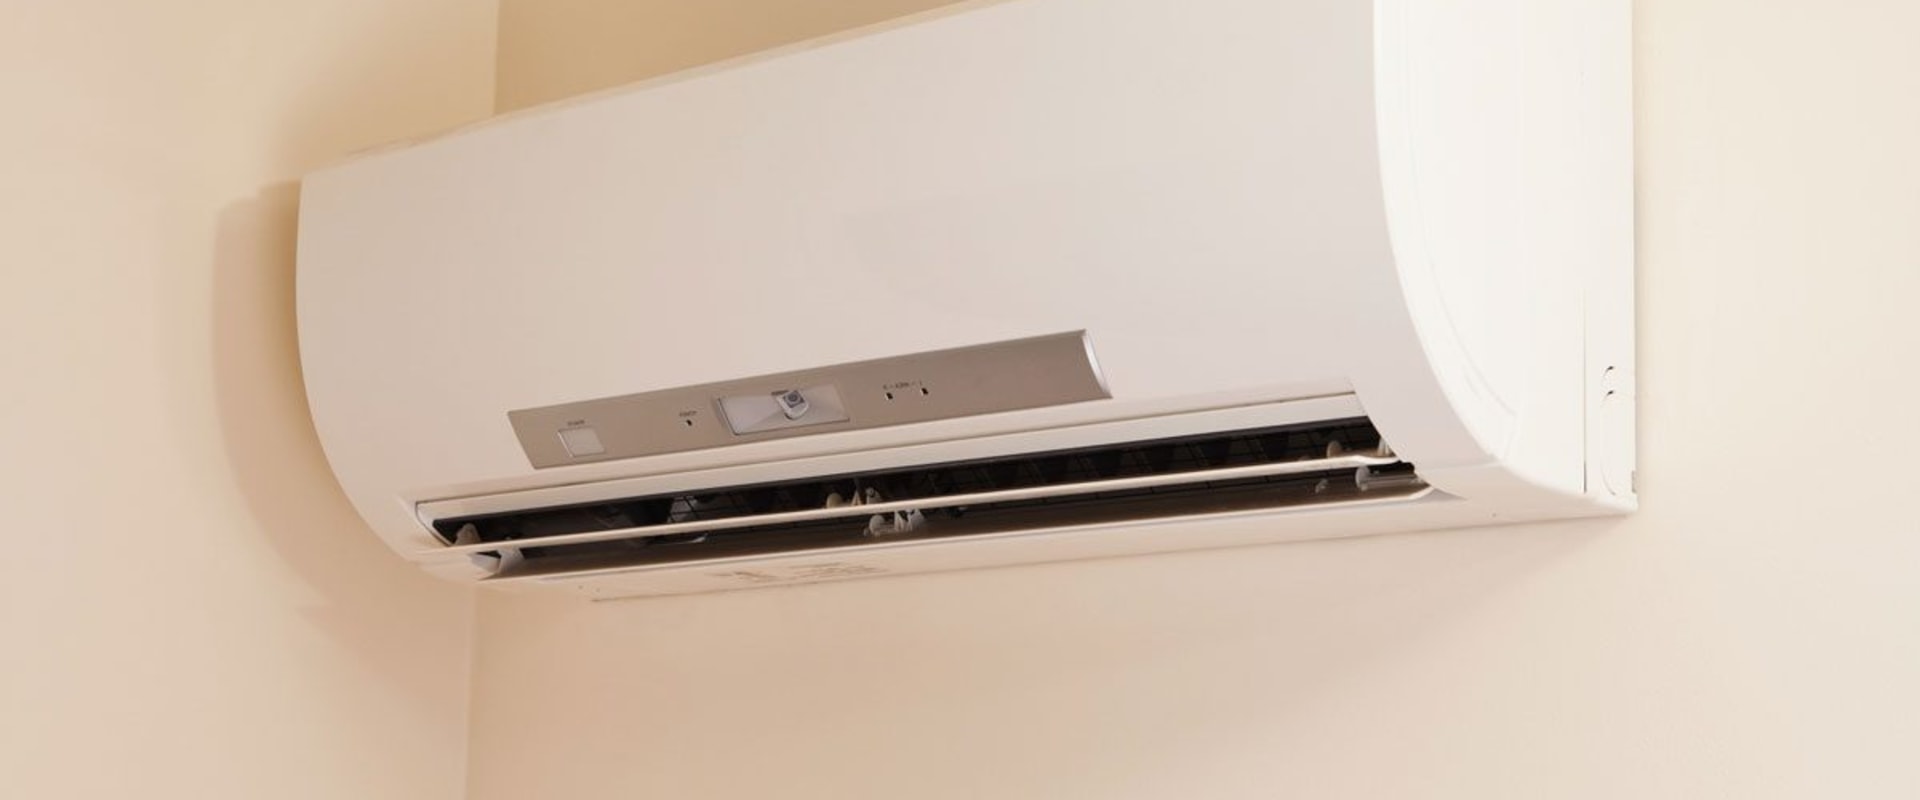 What should i look for when buying a ductless air conditioner?